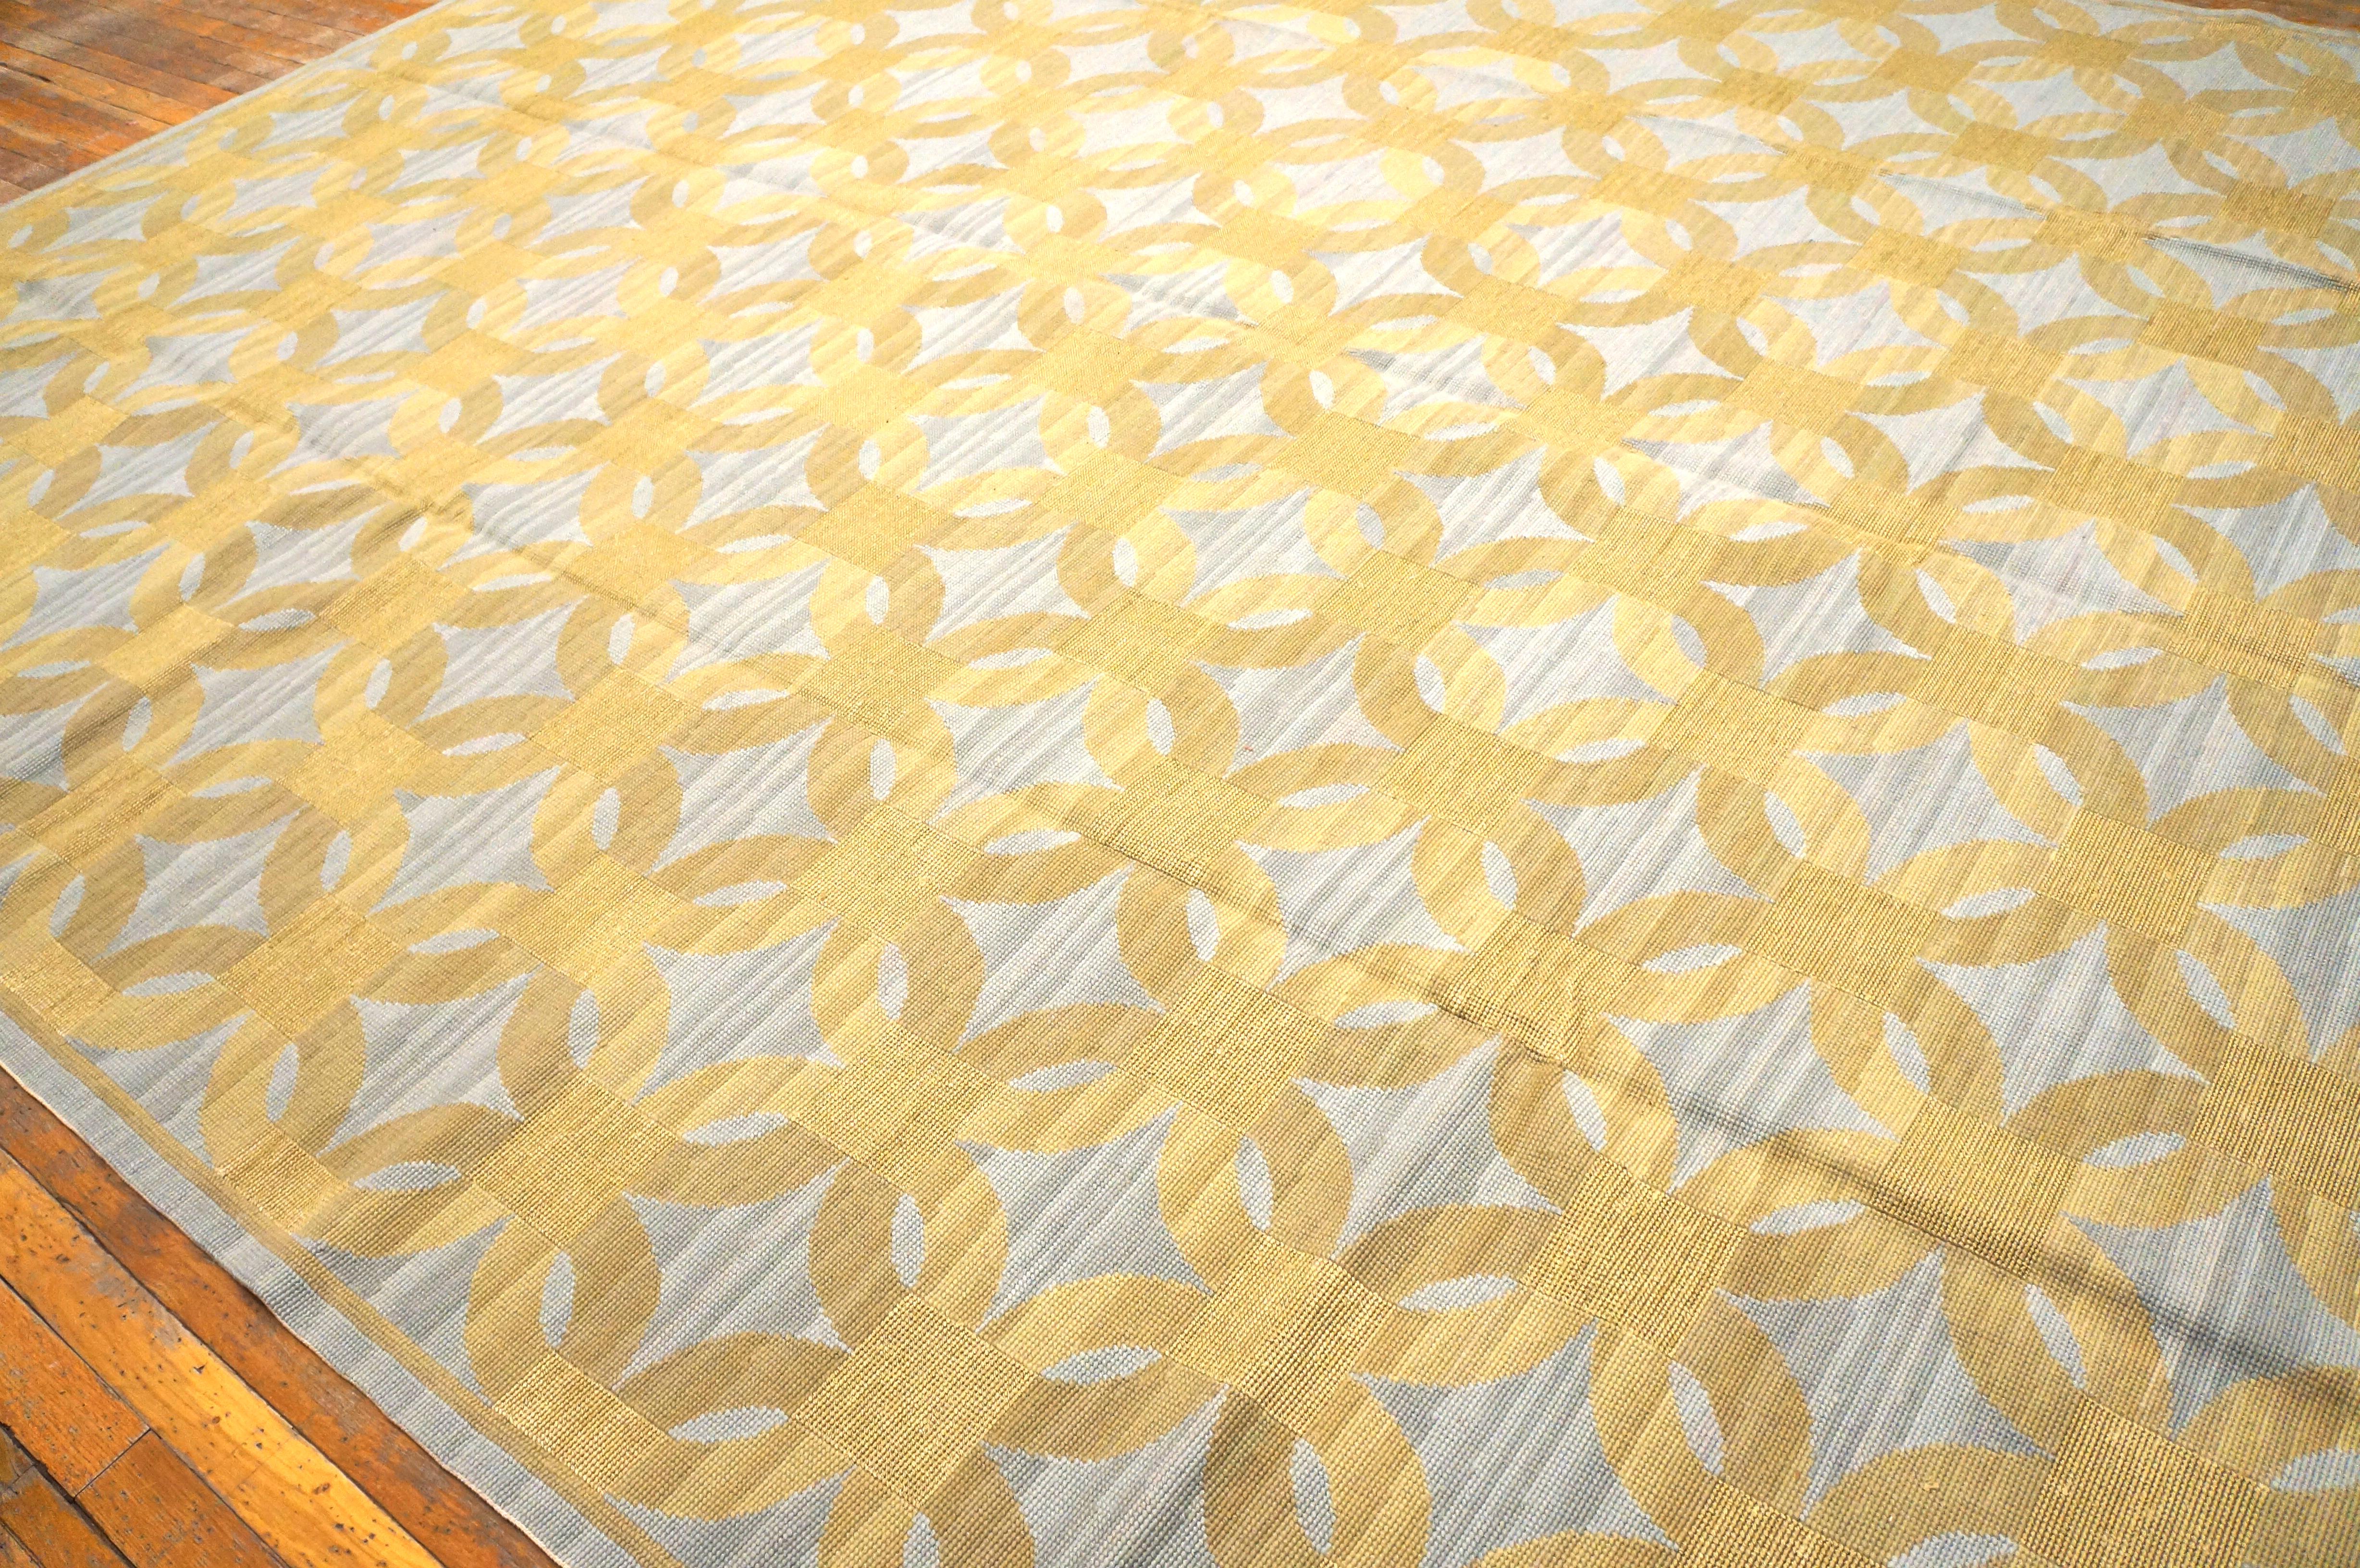 Contemporaneity Handwoven Wool Needlepoint Flat Weave Carpet With Silk Highlight For Sale 3